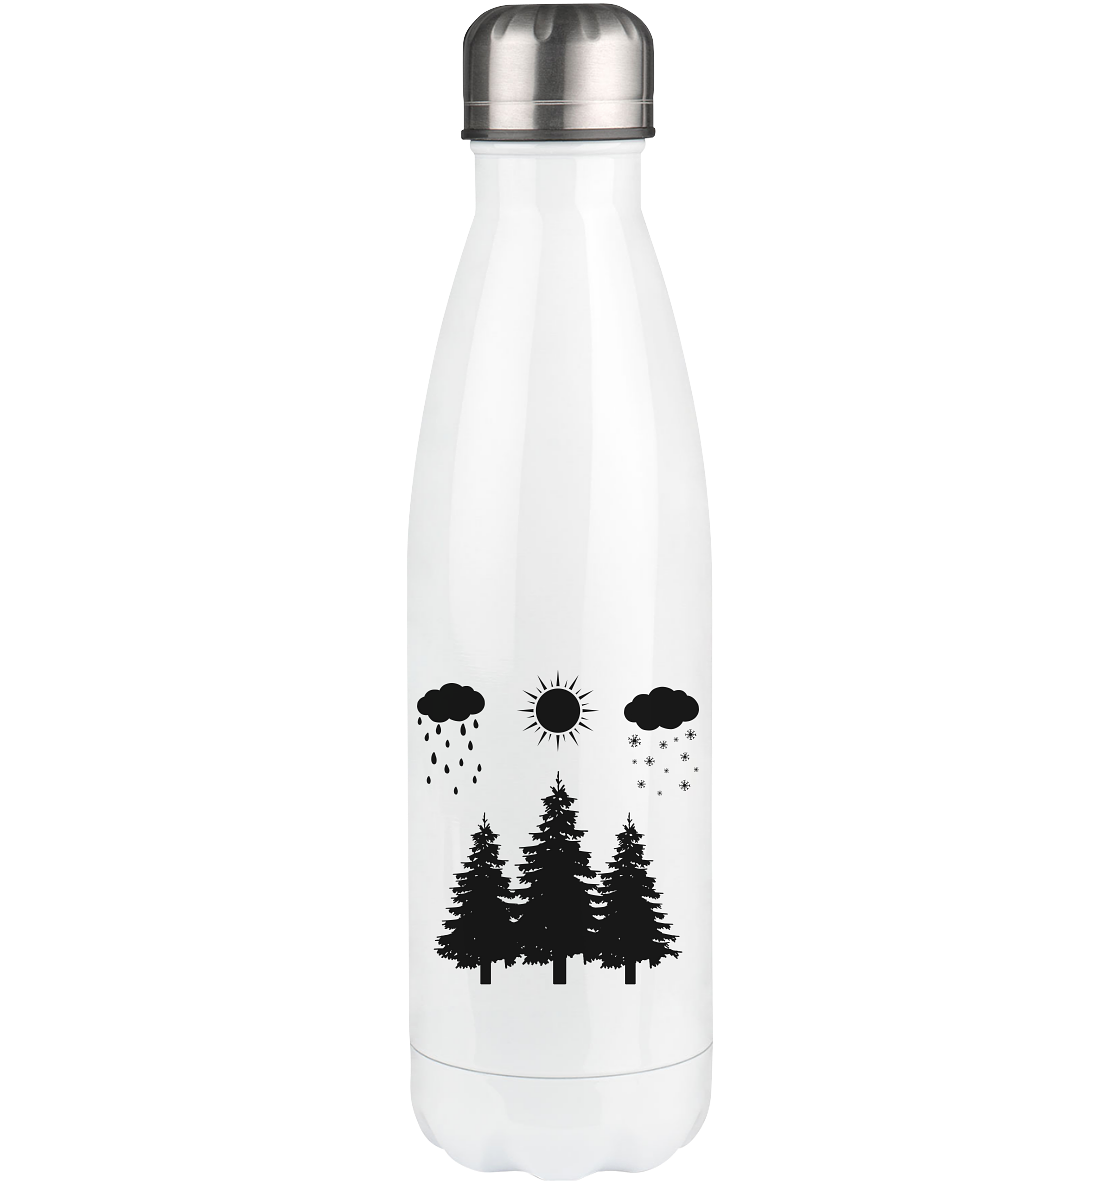 All Seasons and Trees - Edelstahl Thermosflasche camping UONP 500ml